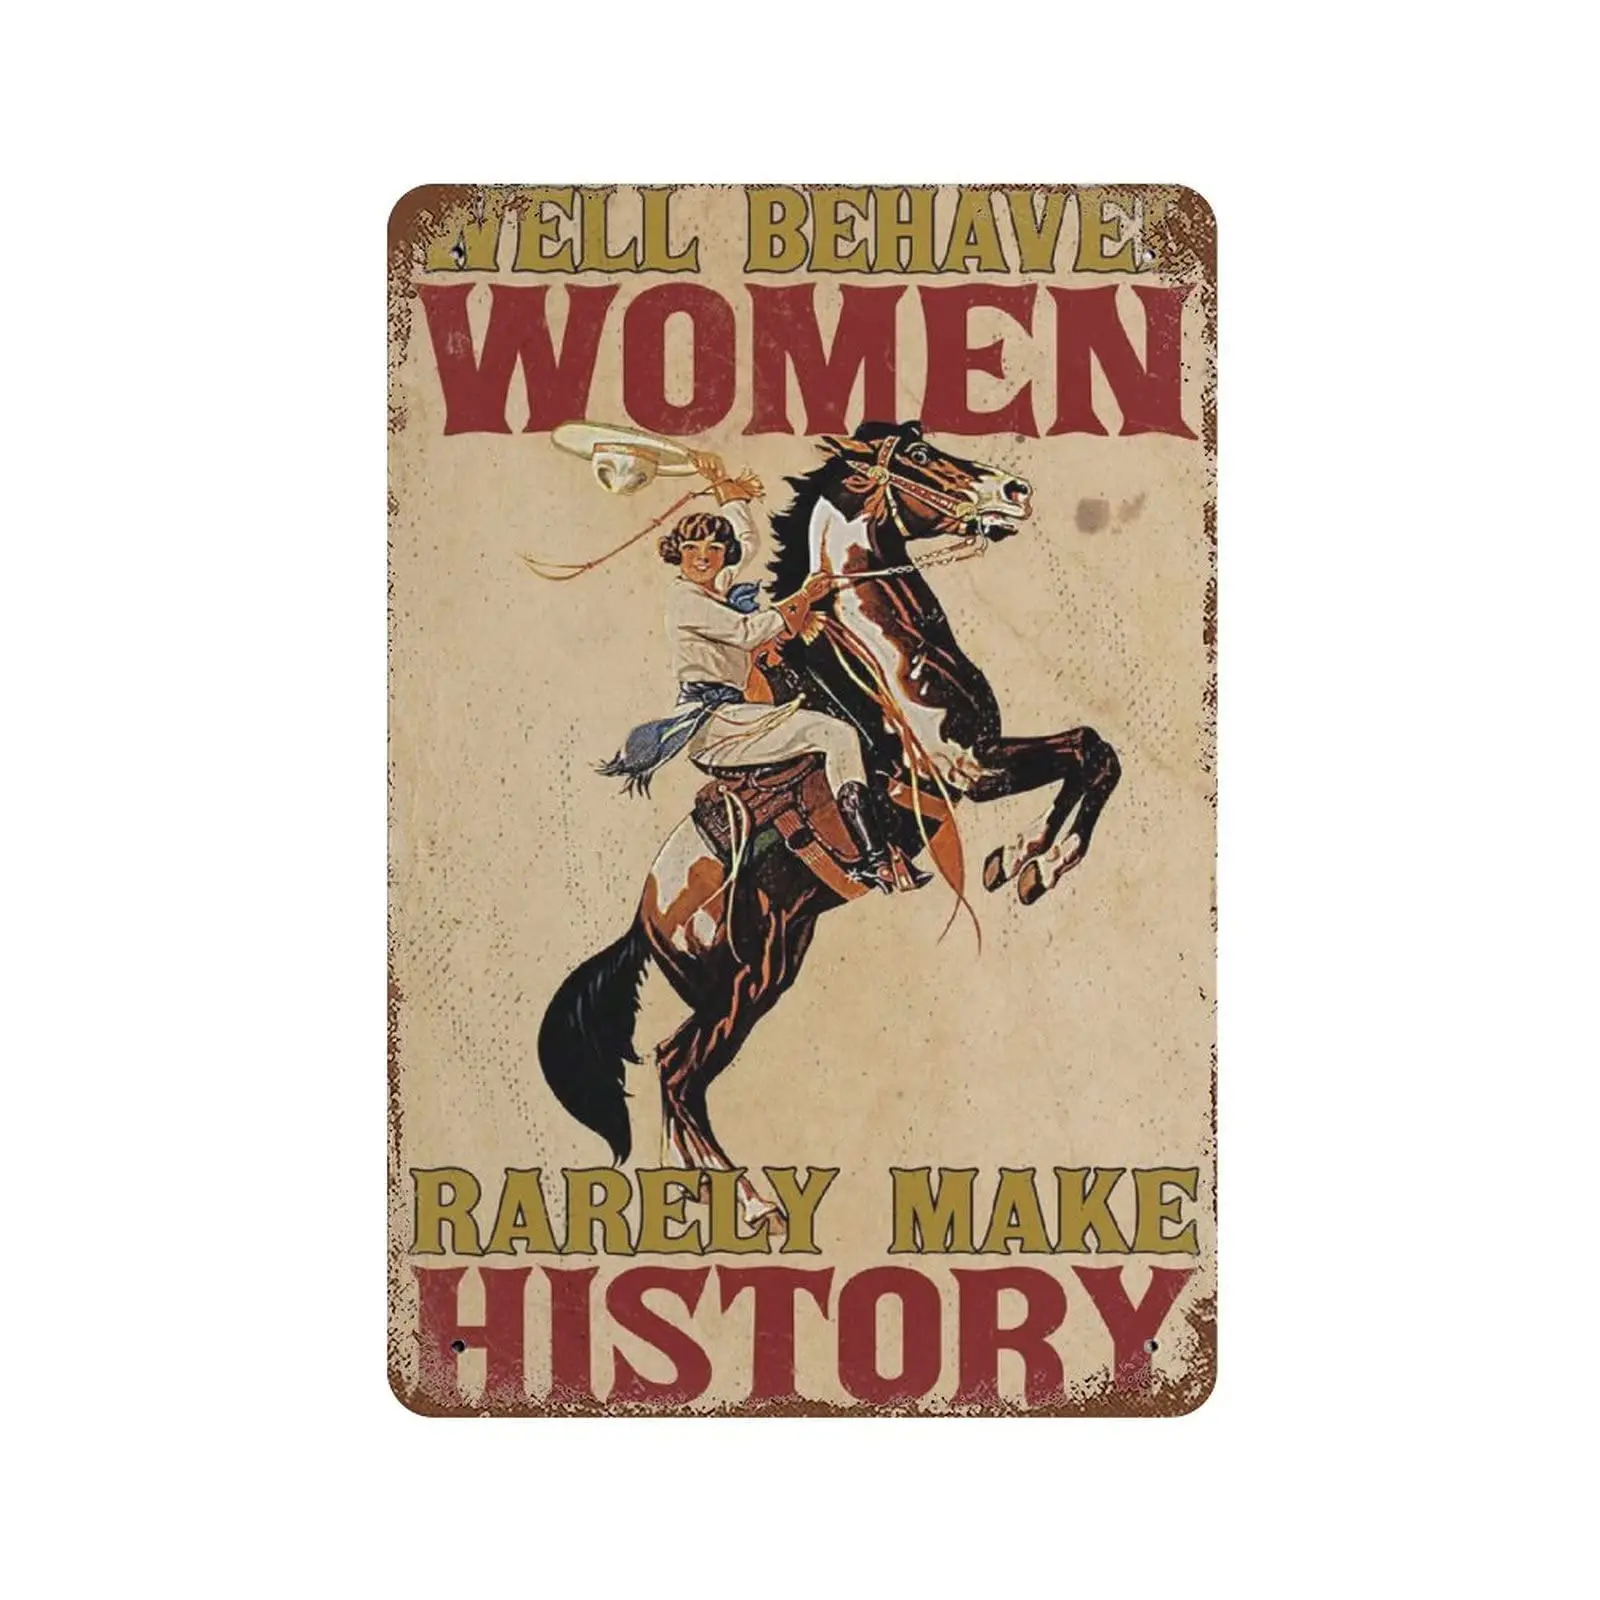 

Vintage Metal Tin Sign Plaque,Cowboy Girl Well Behaved Women Rarely Make History Tin Sign,Man cave Pub Club Cafe Home Decor Plat